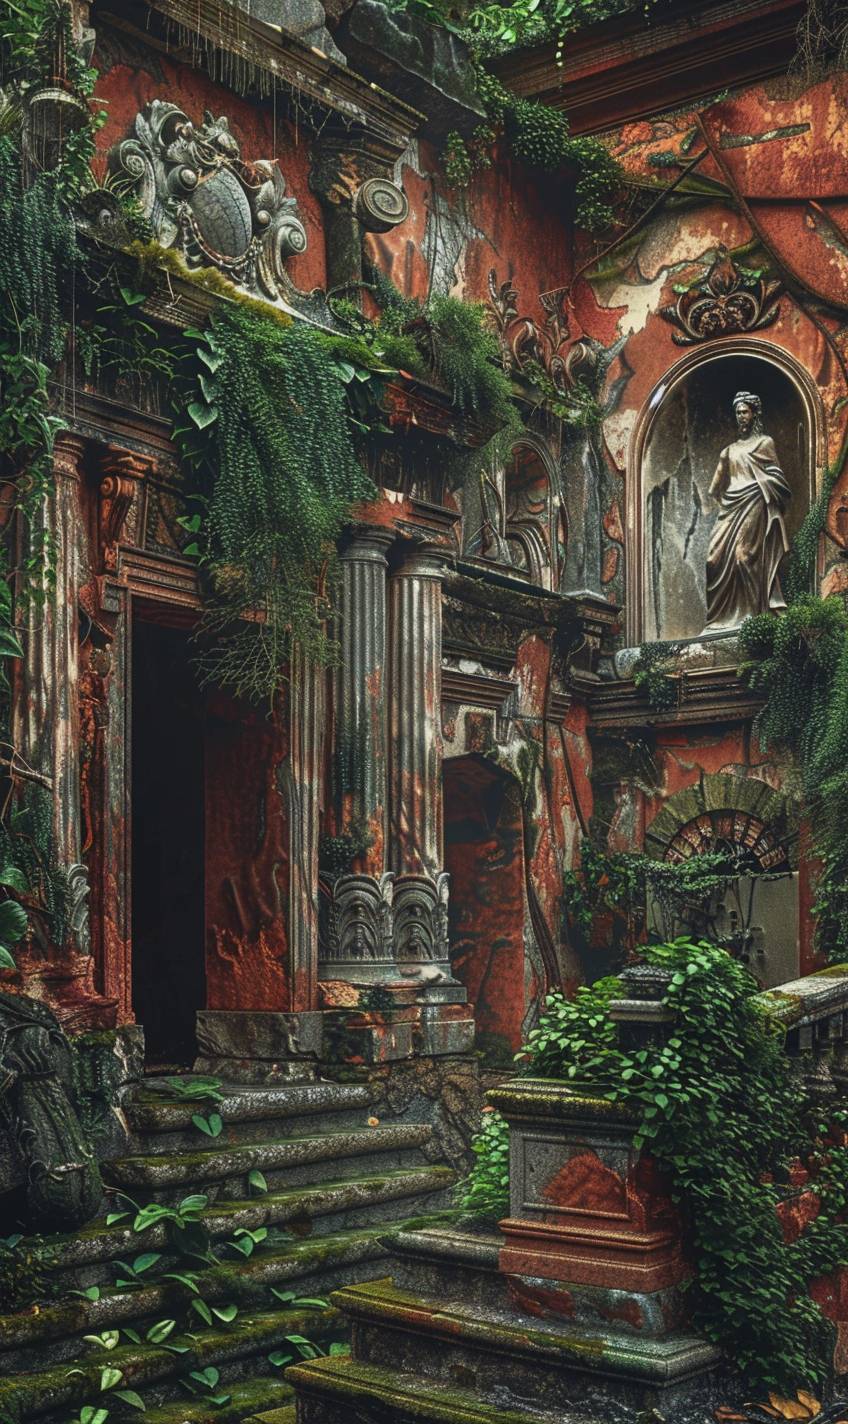 Ancient ruins with crumbling structures, statues, and overgrown vines, all composed of bold, colorful patterns, showcasing a 3D effect, creating a sense of history and mystery.